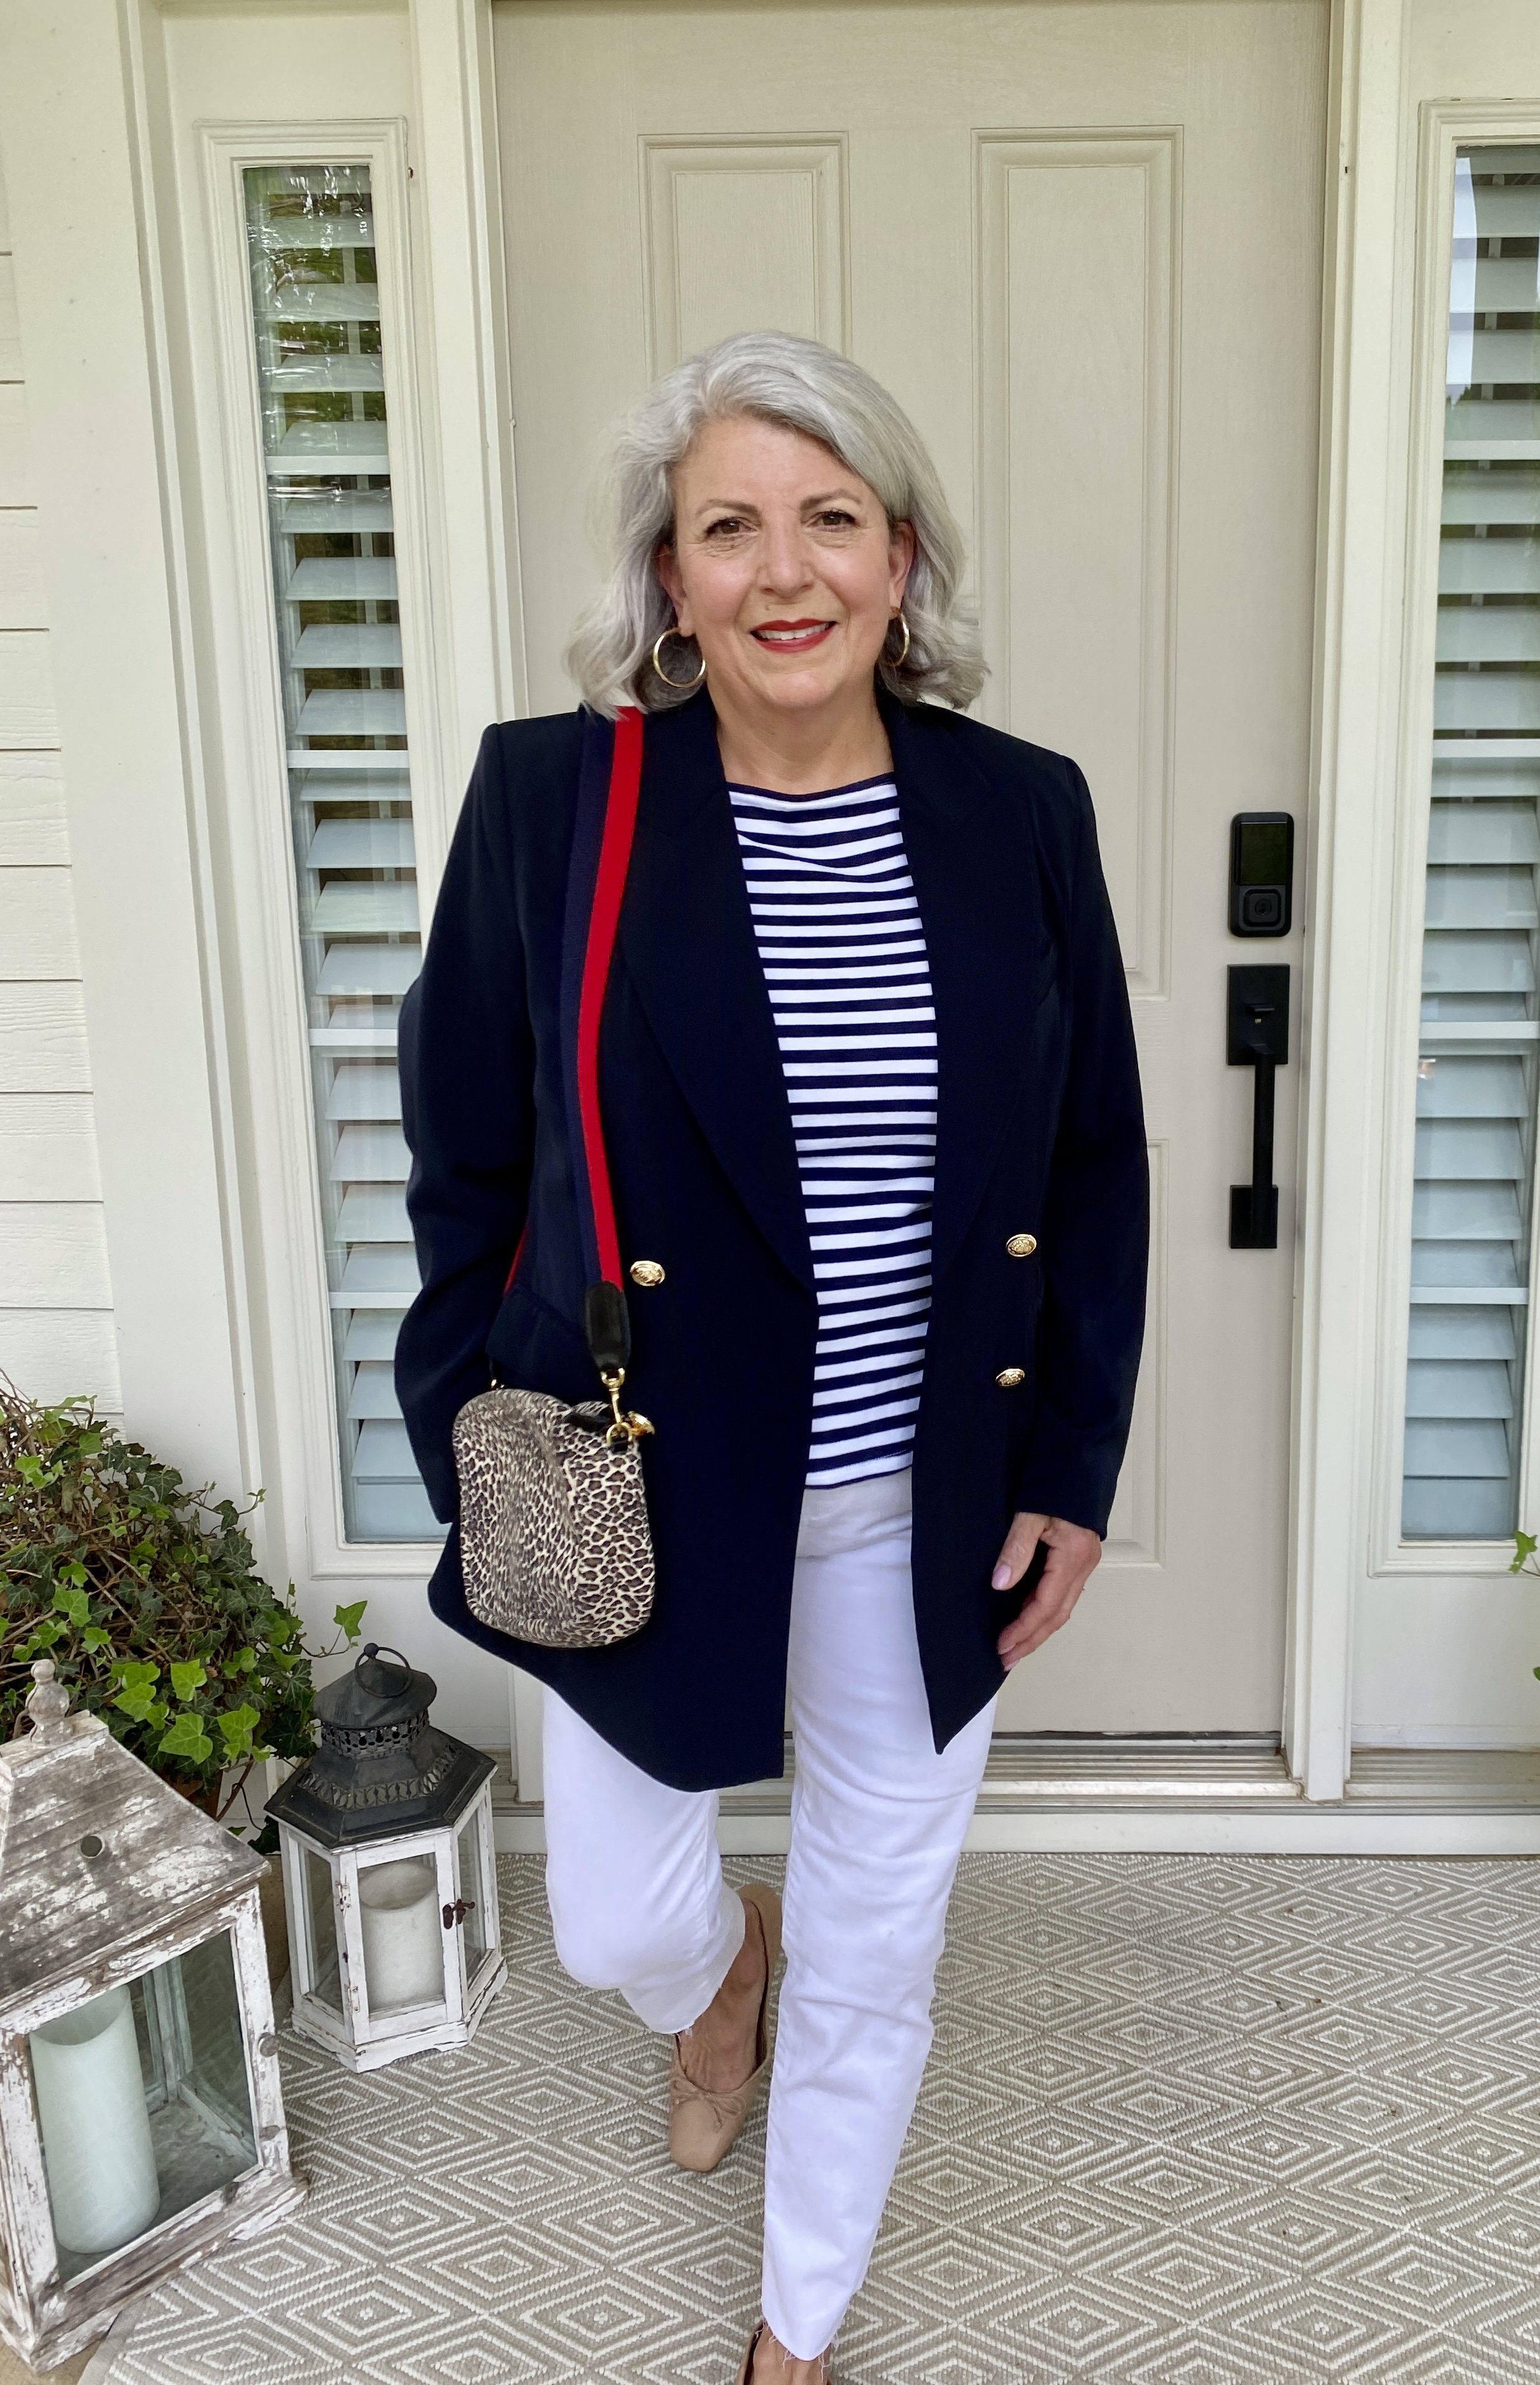 Silver is the New Blonde® | Style & Beauty tips for women over 50